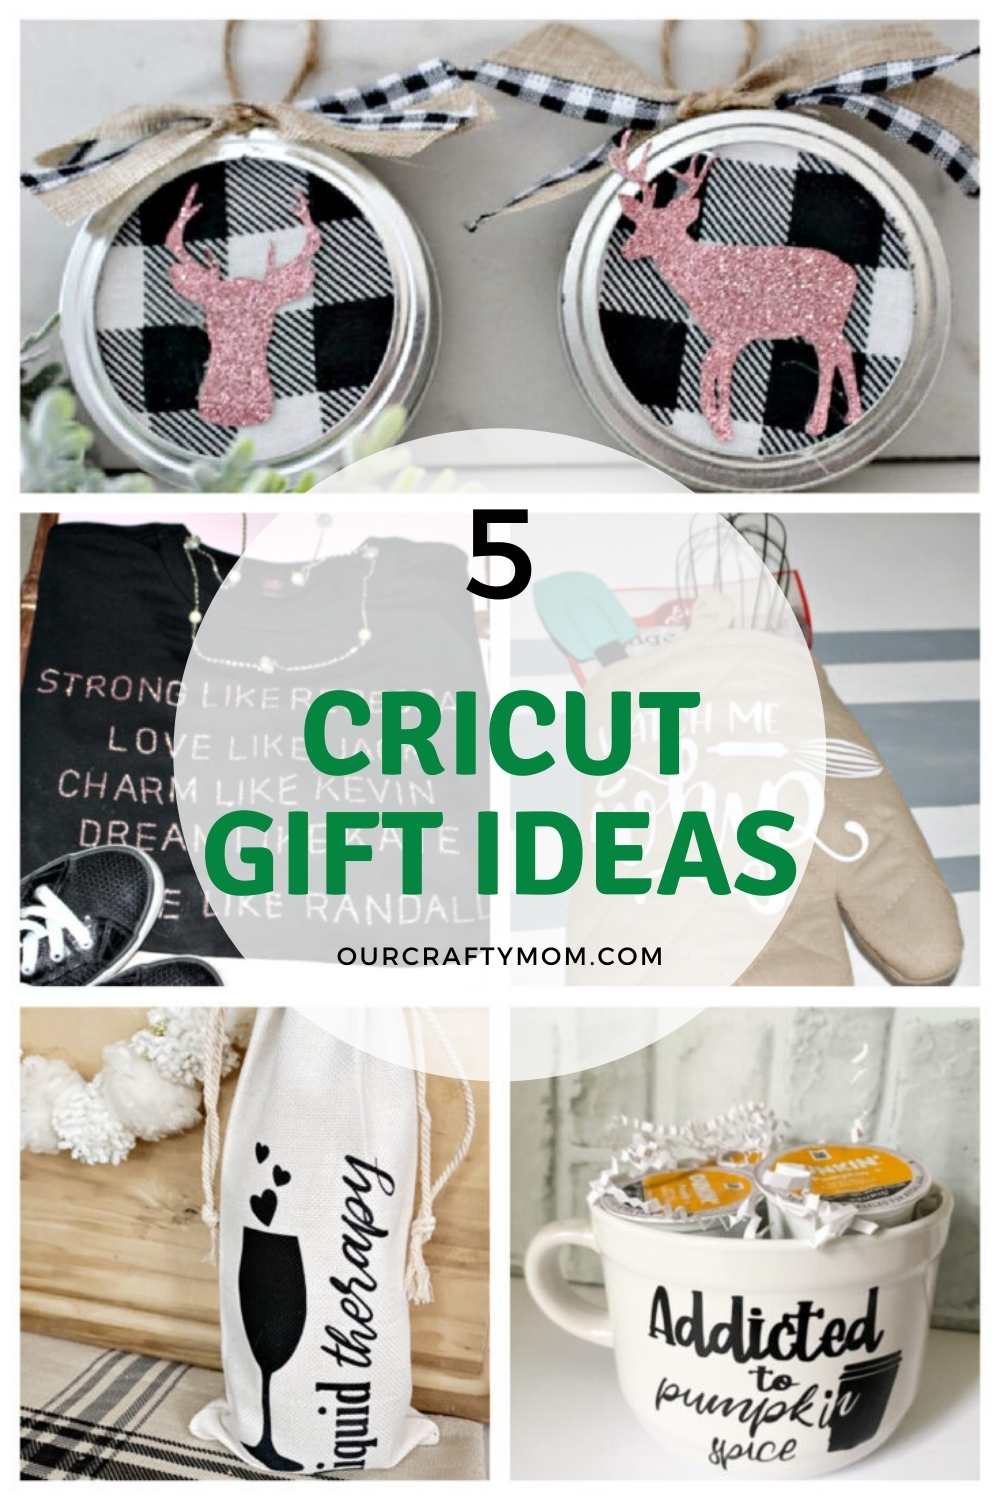 https://ourcraftymom.com/wp-content/uploads/2021/10/5-Easy-Cricut-Gift-Ideas-To-Make-This-Holiday-Season-8.jpg